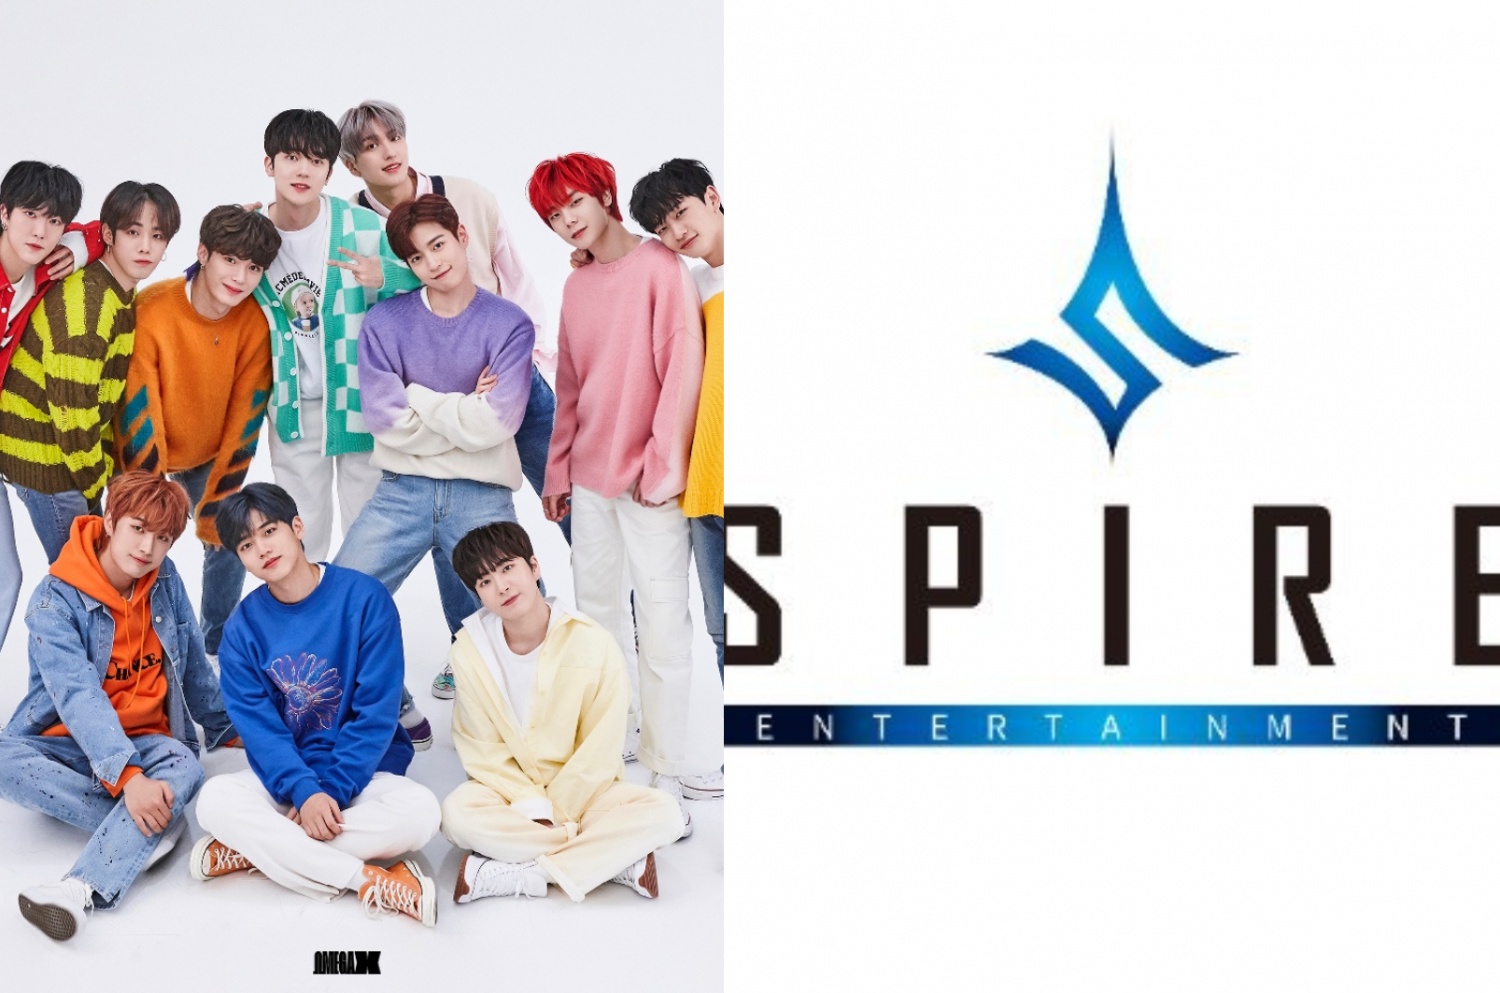 OMEGA X issues a statement following the resignation of the CEO of Spire Entertainment